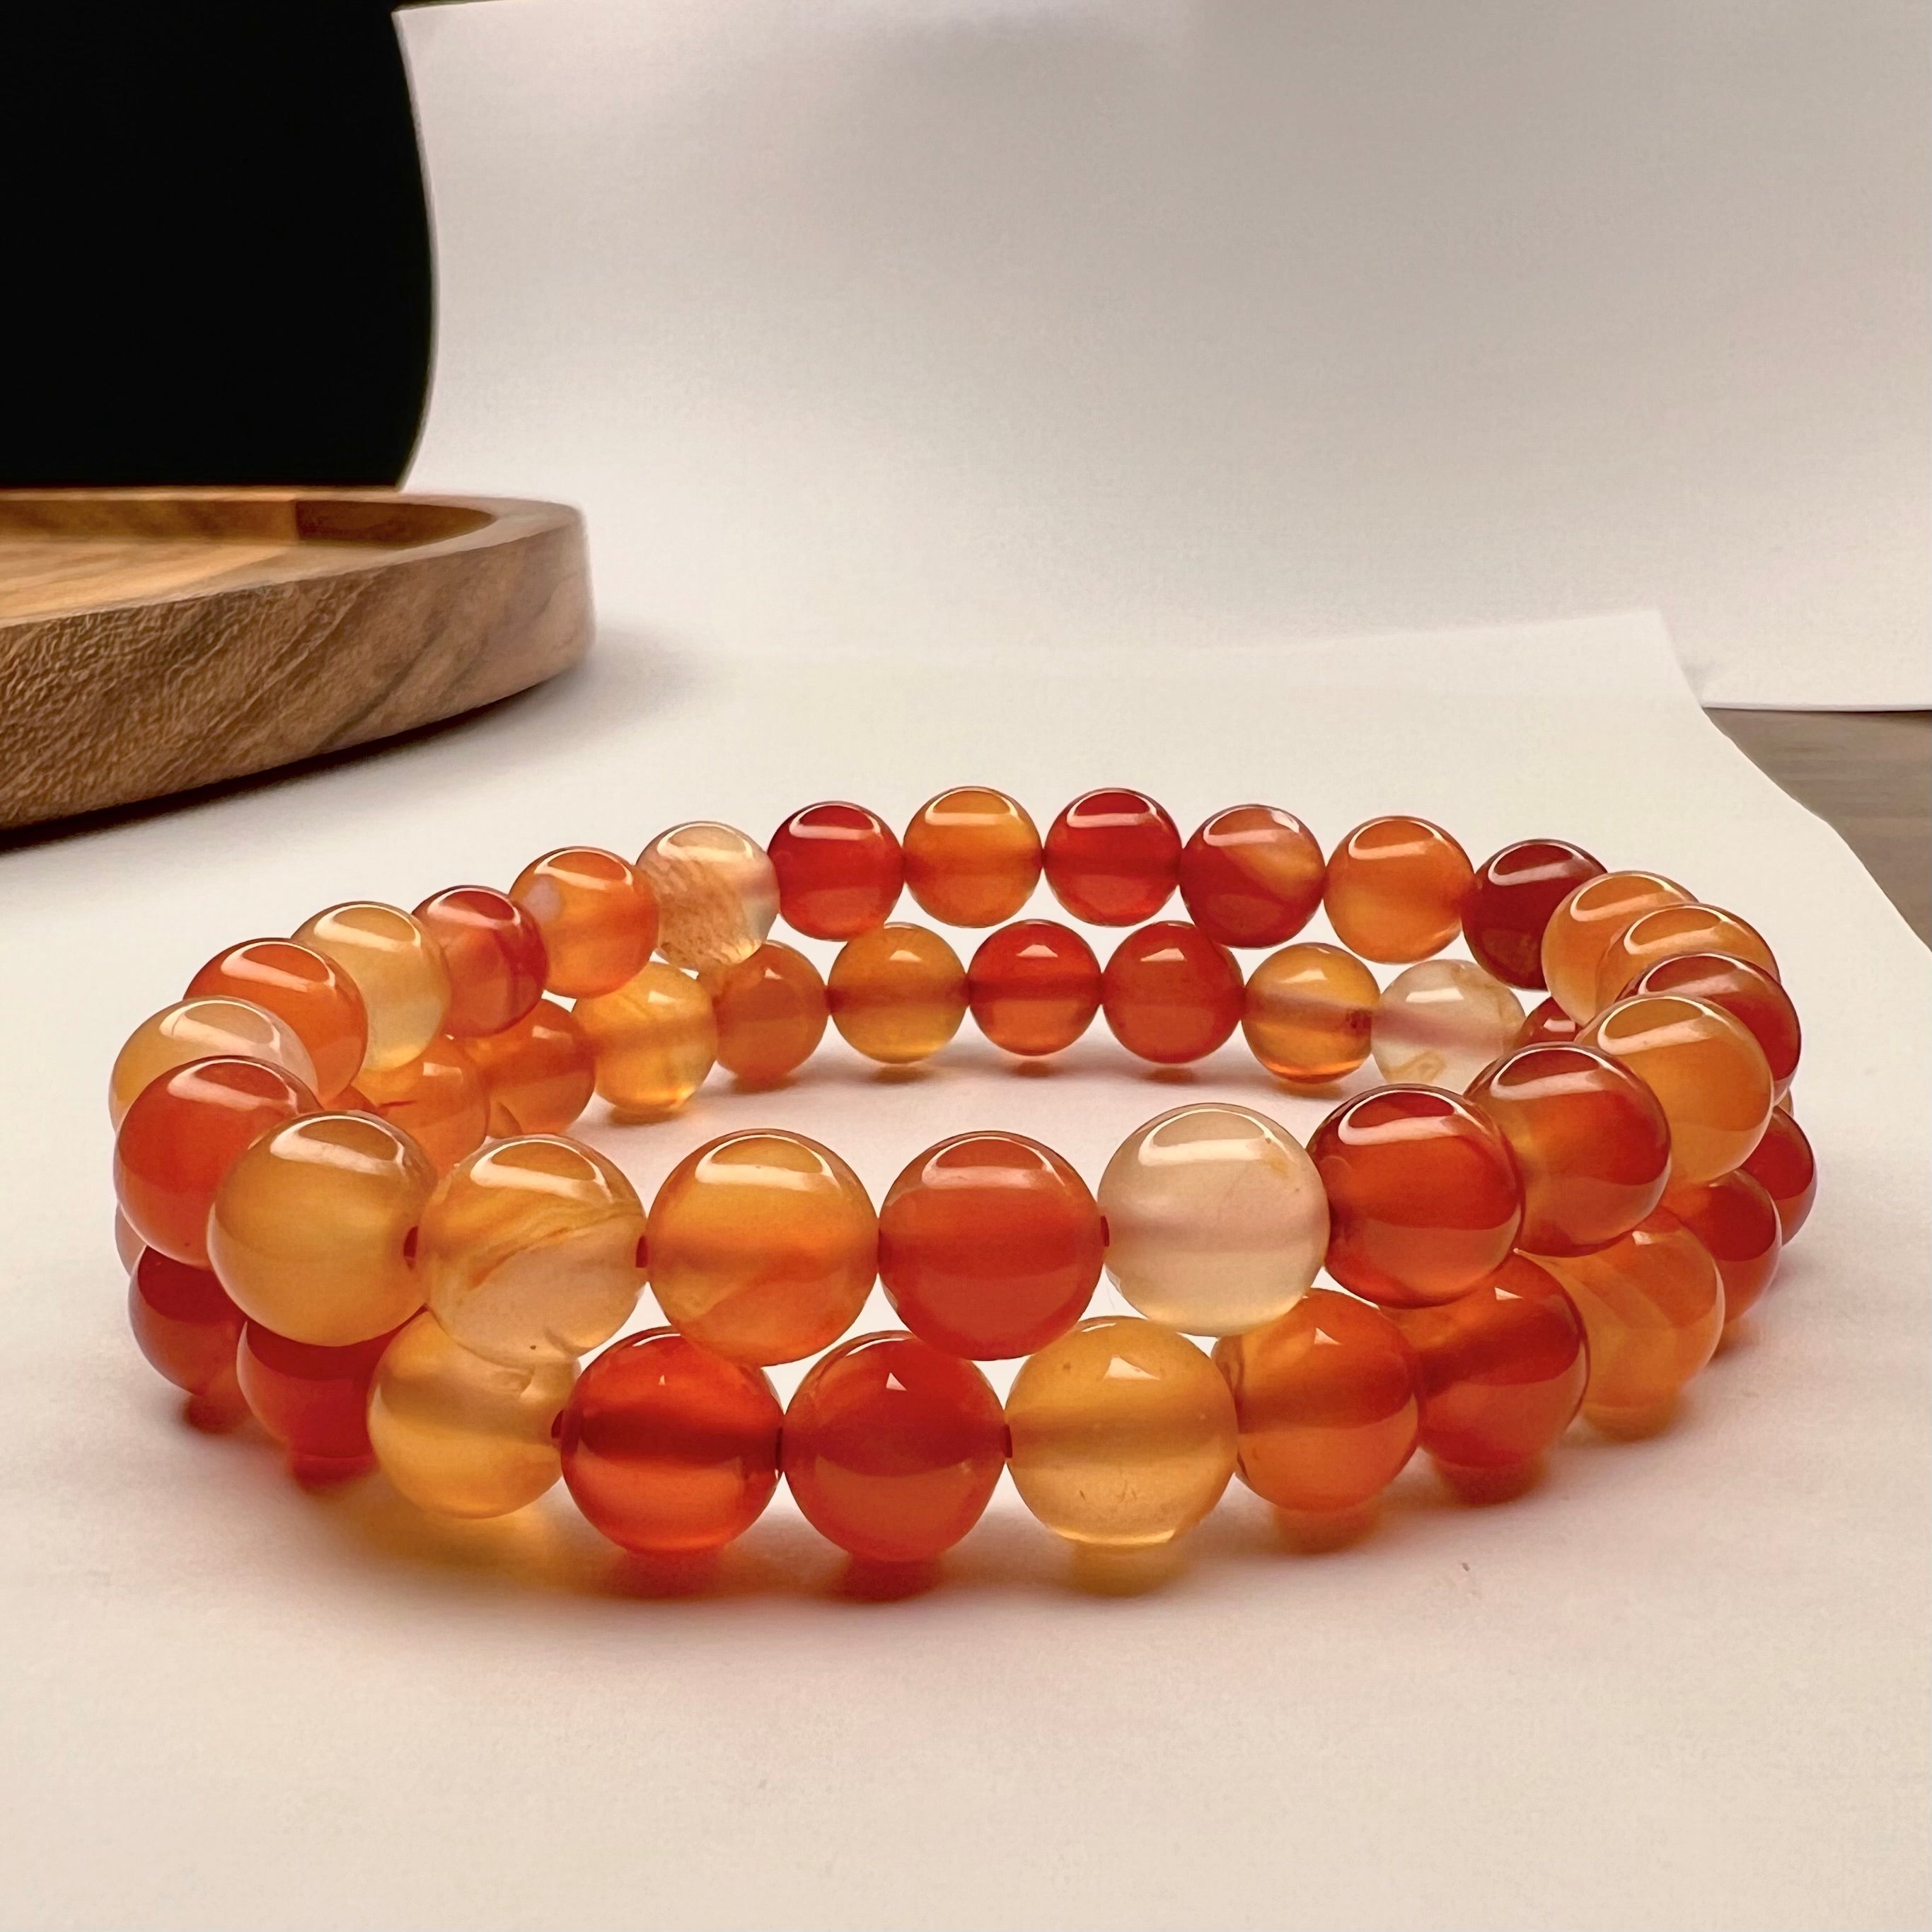 Red Carnelian Bracelet for Energy | 4mm Beads - Solacely